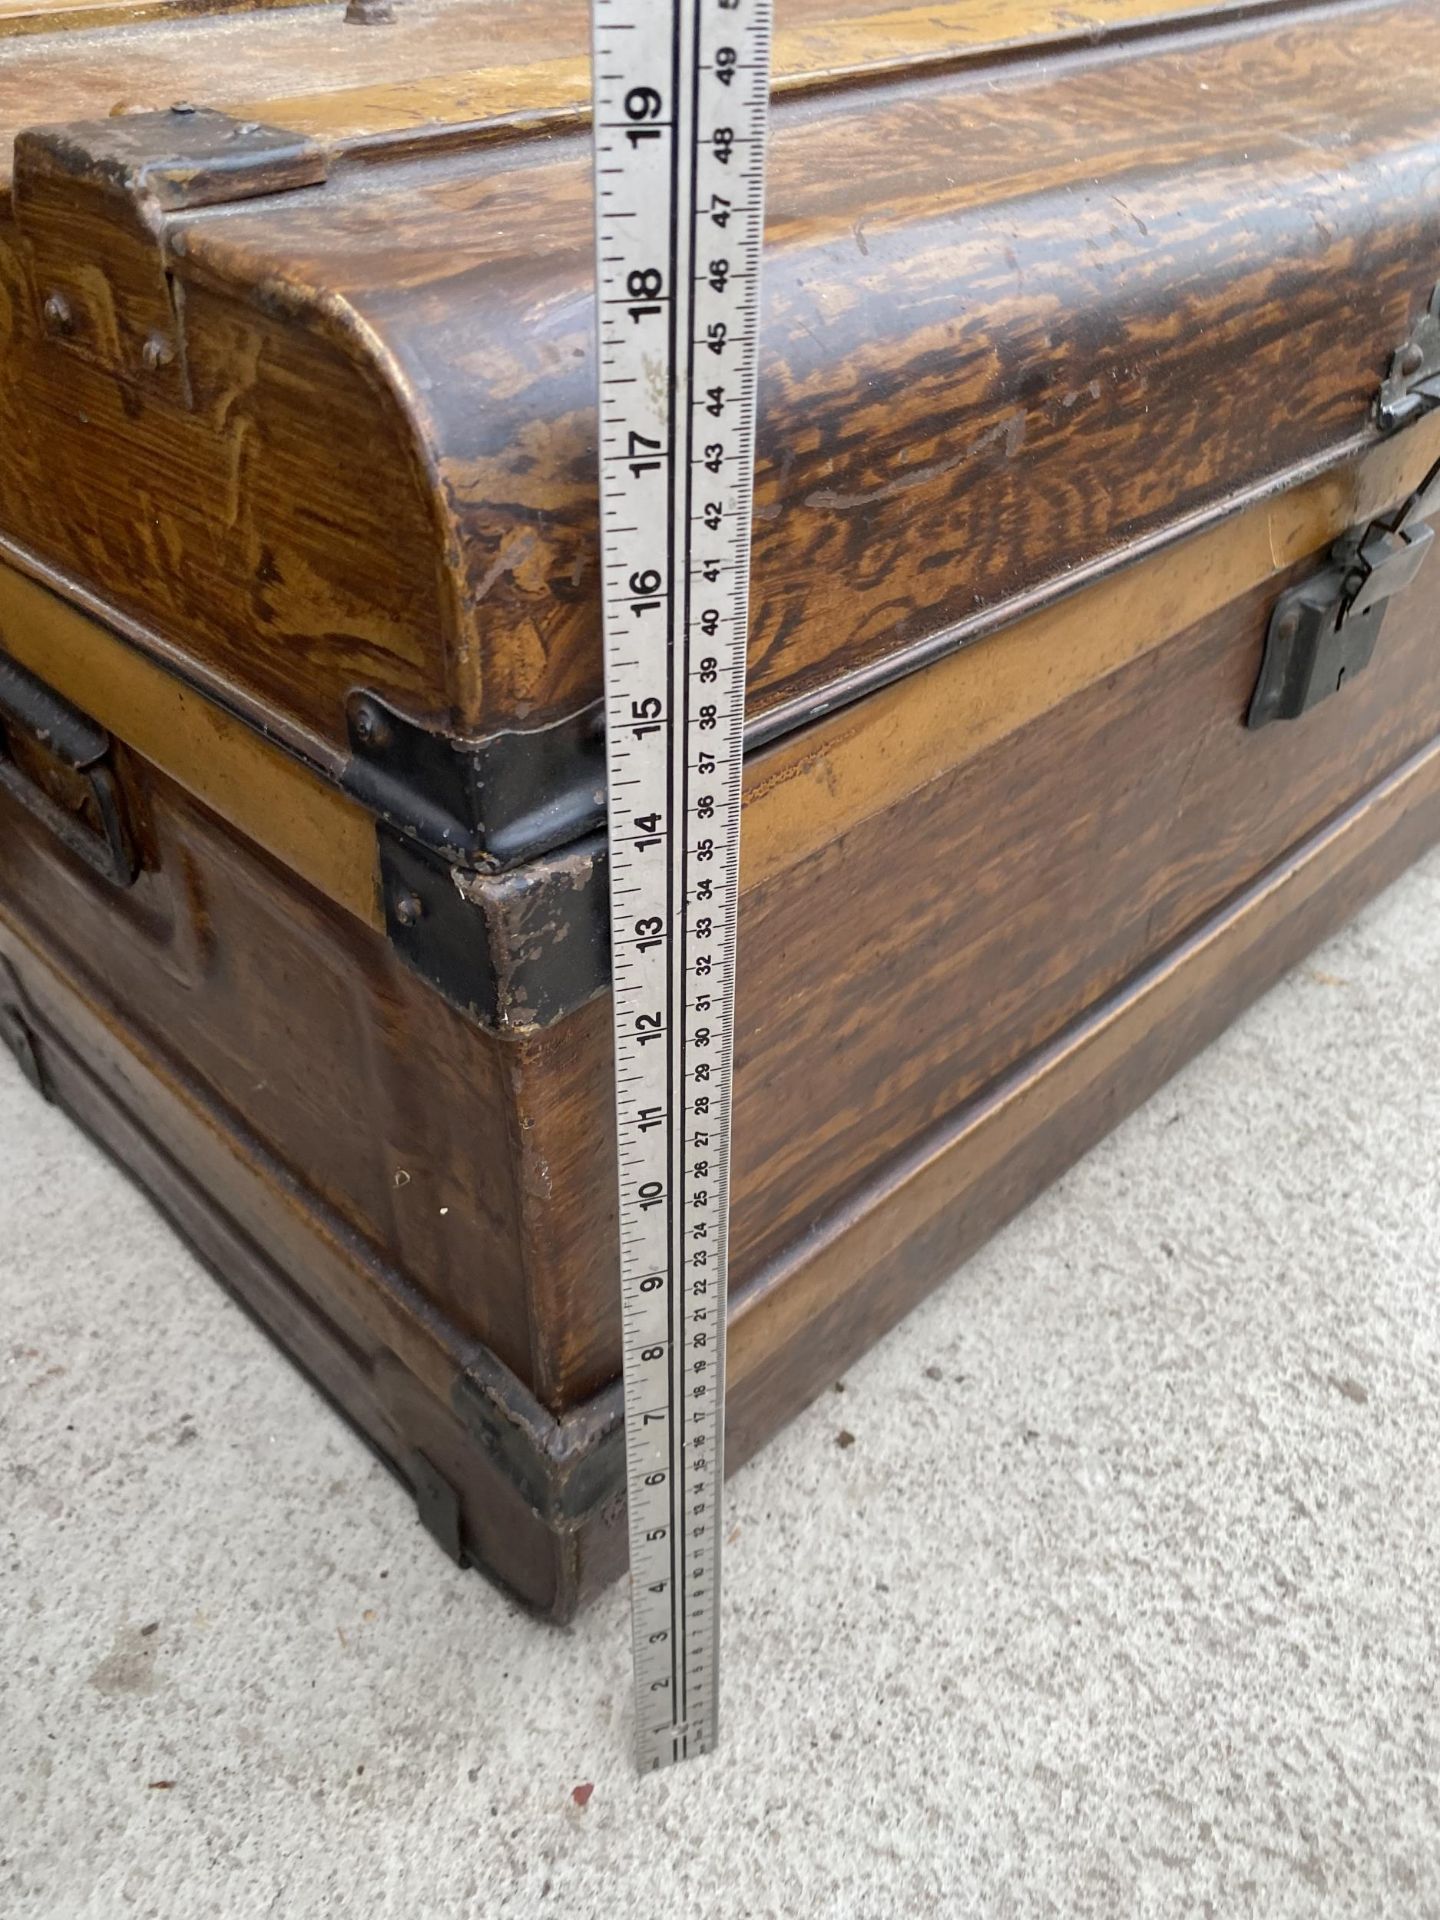 A VINTAGE METAL STORAGE CHEST - Image 4 of 6